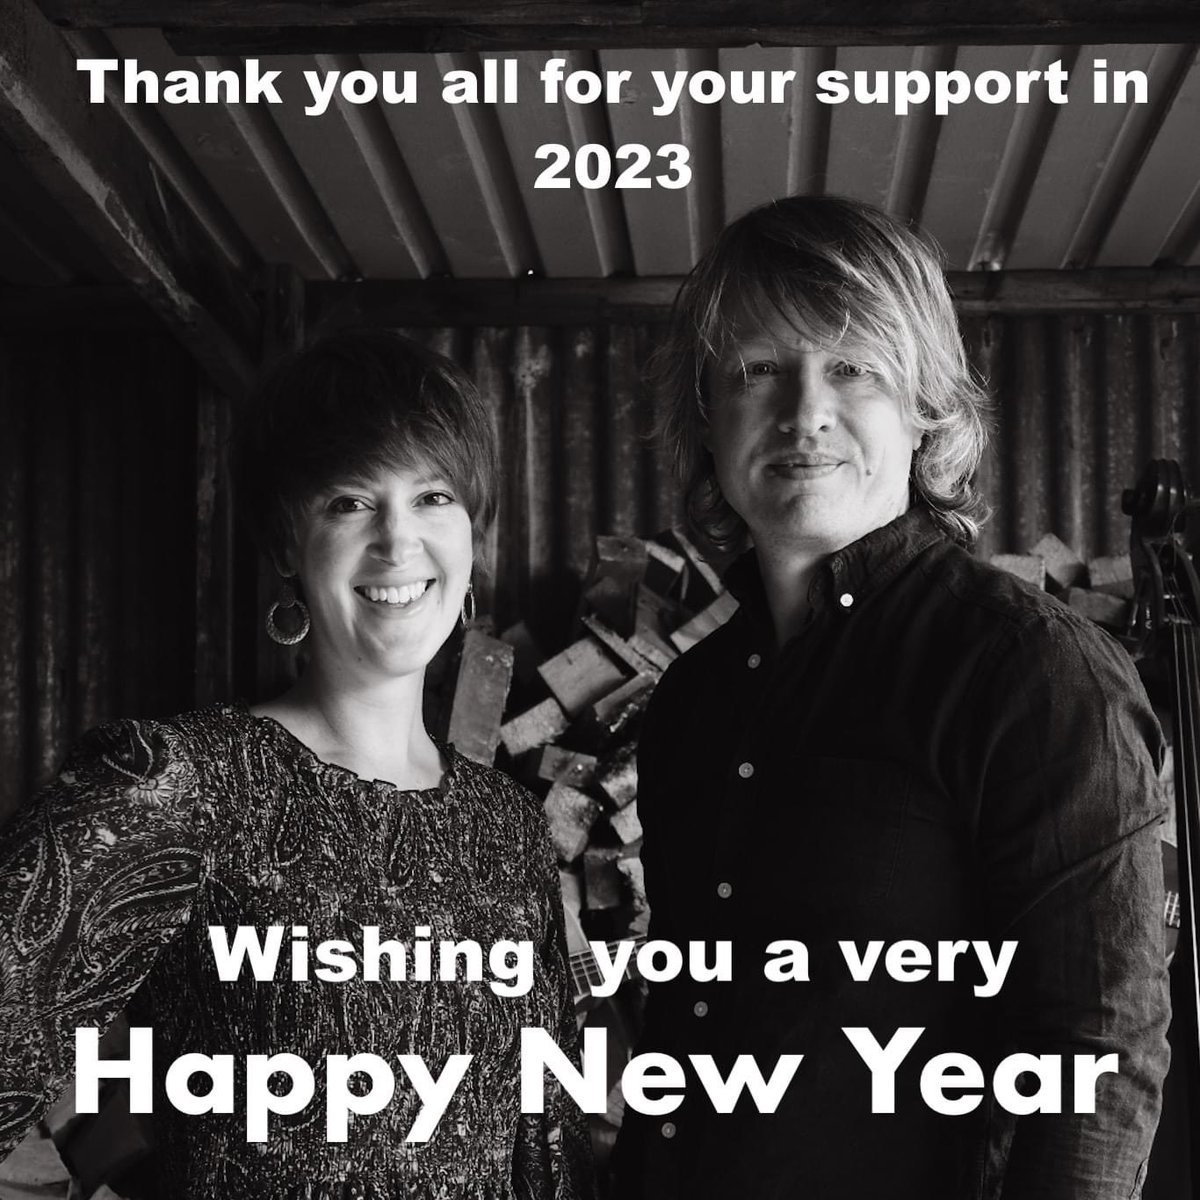 It was an incredible year 2023 we feel very lucky that you guys have been with us every step of the way. gigs, the livestreams, the festivals and, of course, the brand new third album 'Away Beyond The Fret'. Wishing you all a very Happy New Year with bear hugs from both of us X